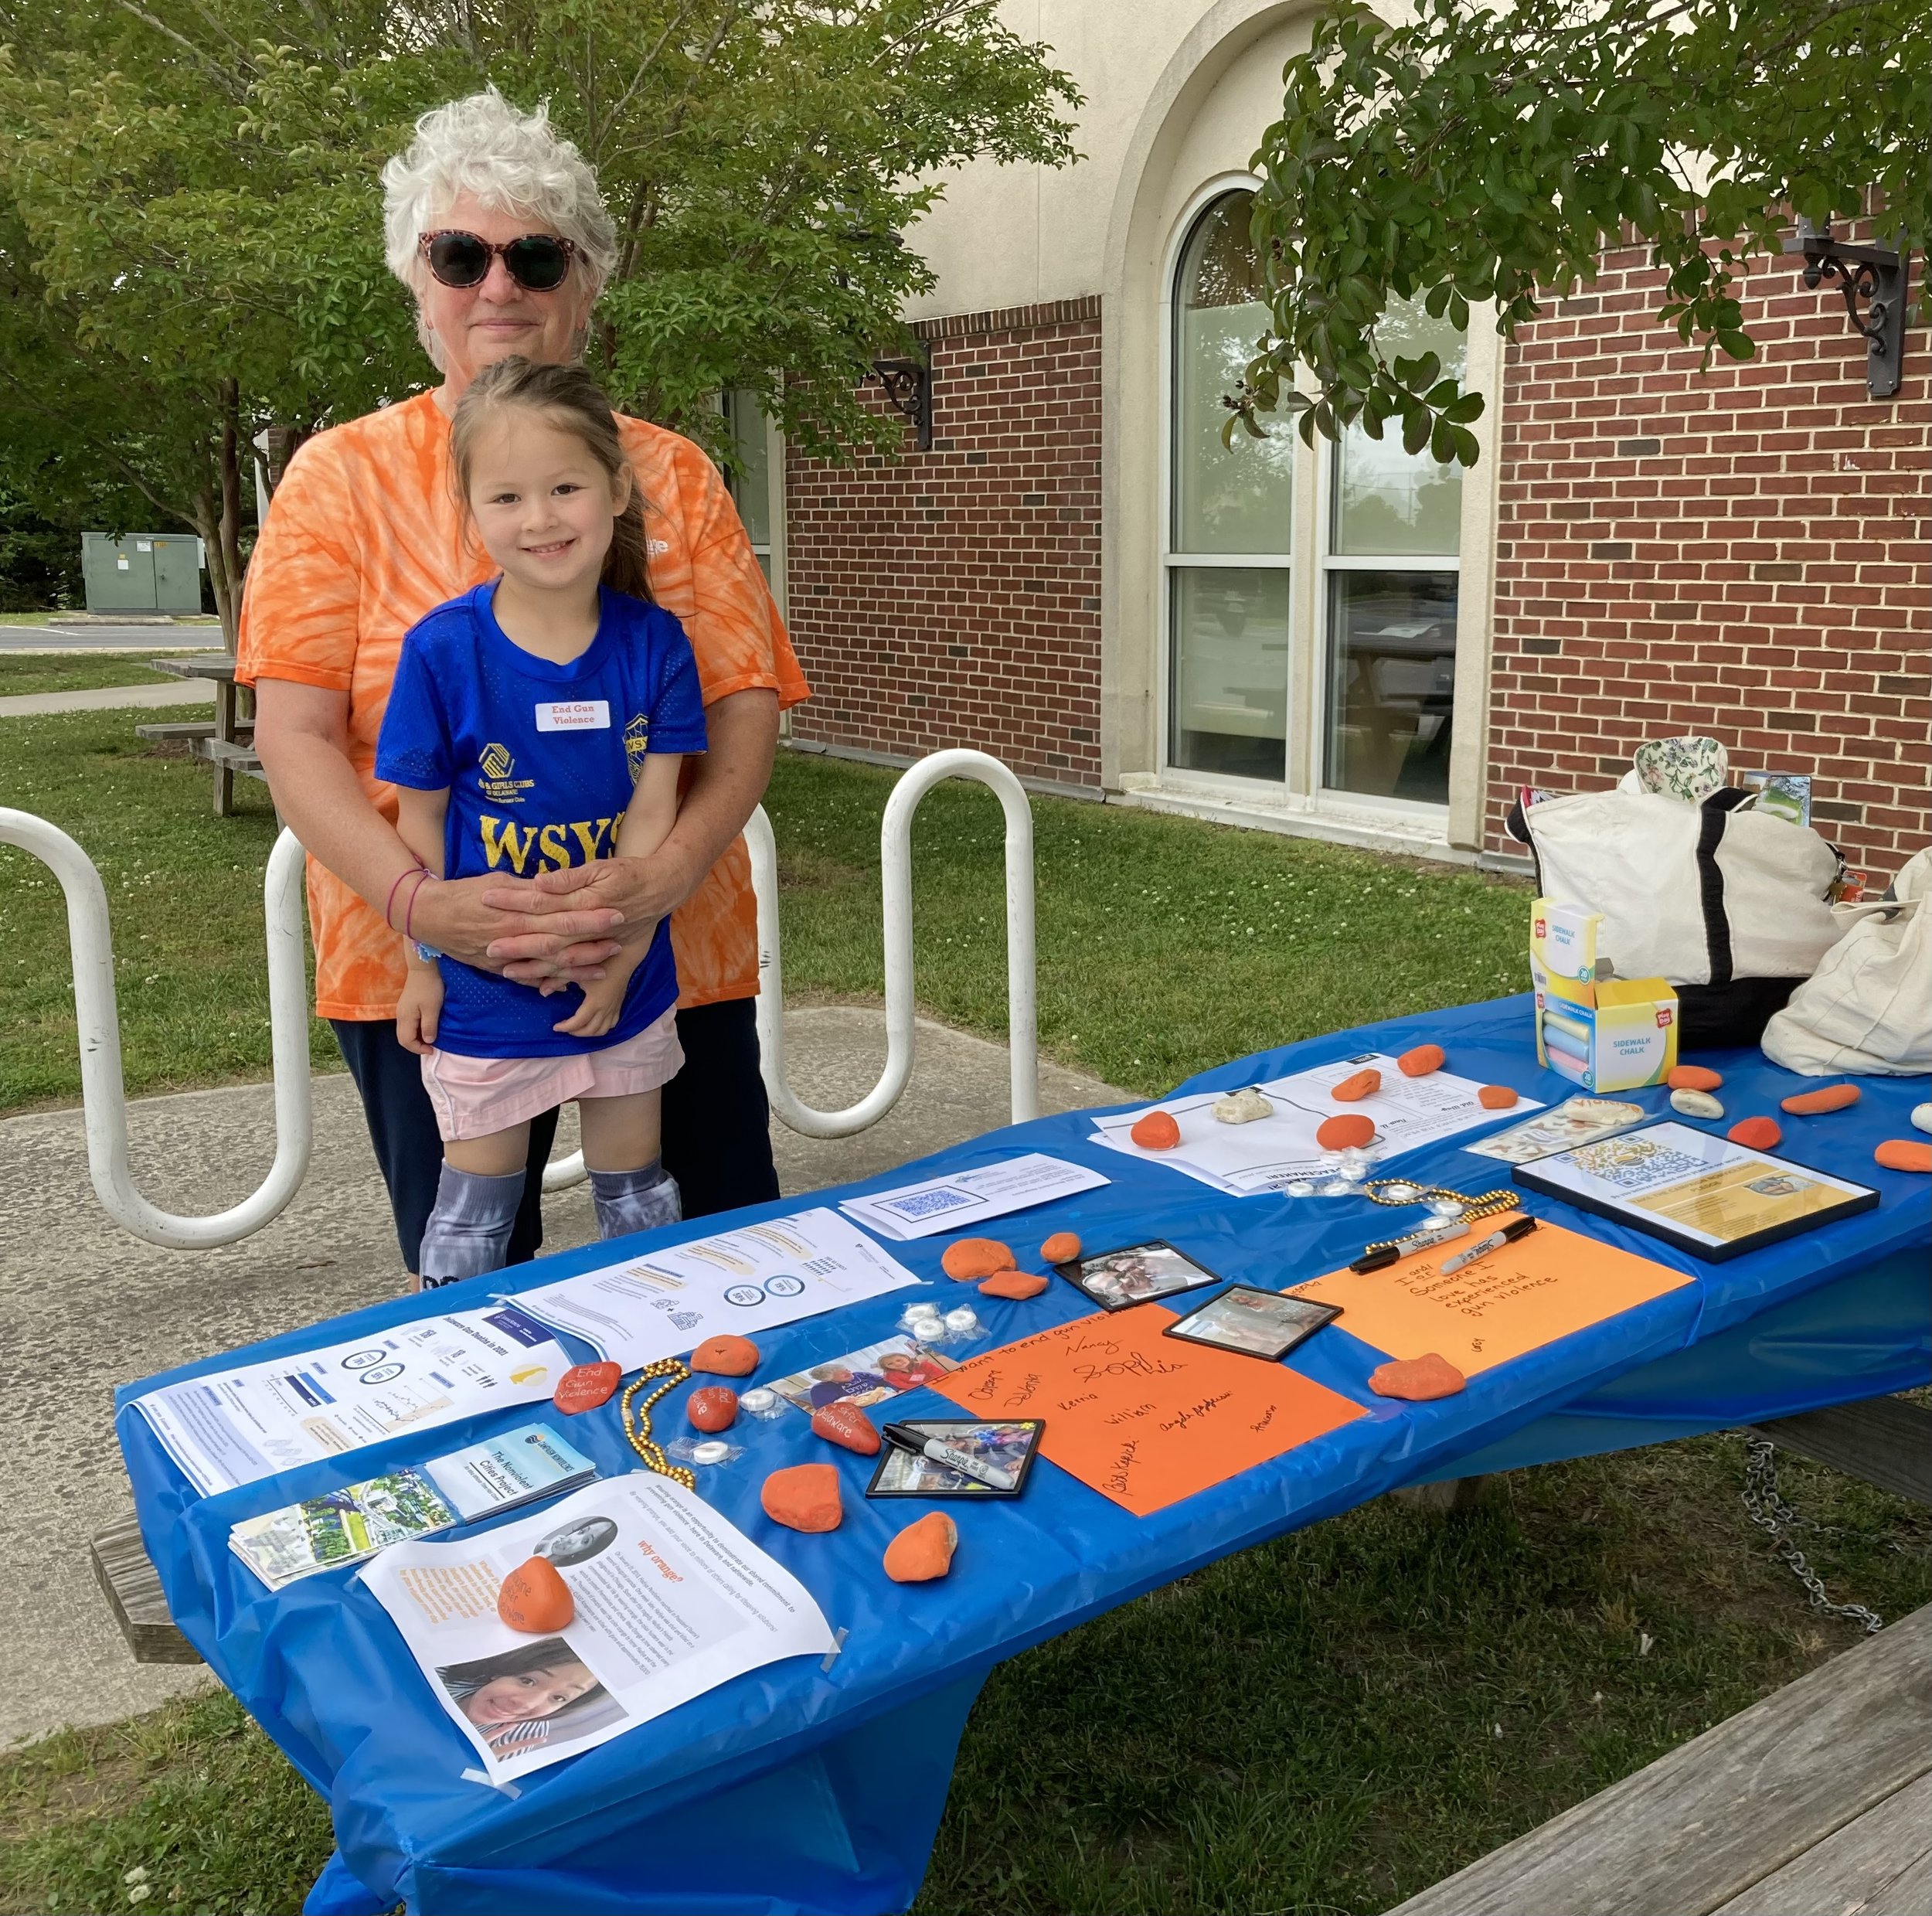 Nonviolent Seaford Coordinator Beth Kopicki tables and granddaughter table outside the Seaford District Library to raise gun safety awareness on #WearOrange Day.